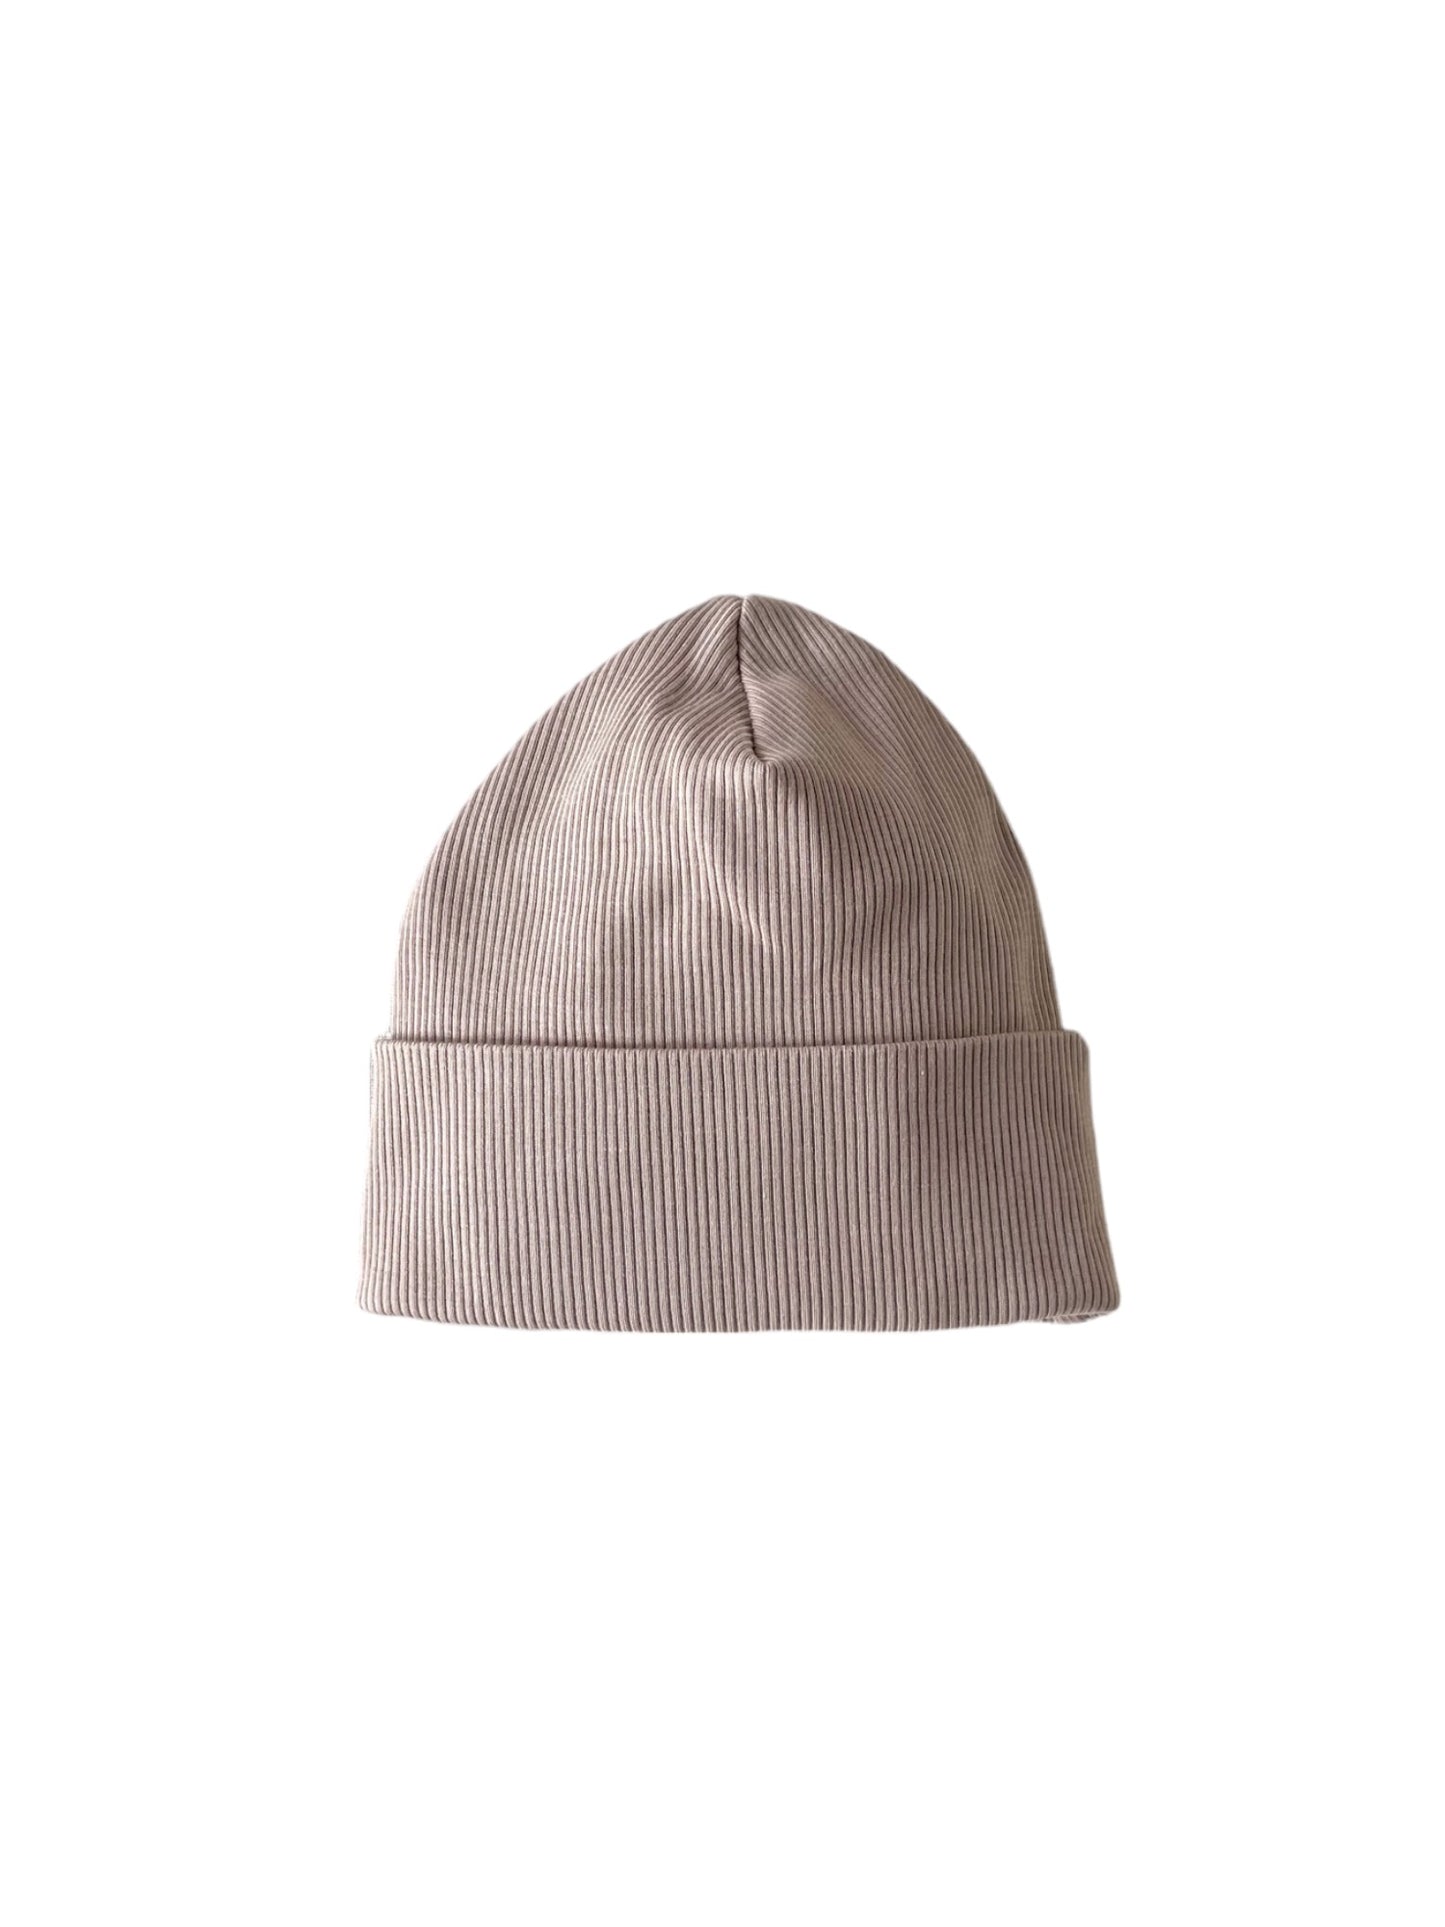 Load image into Gallery viewer, Baby beanie / ribbed earth tones
